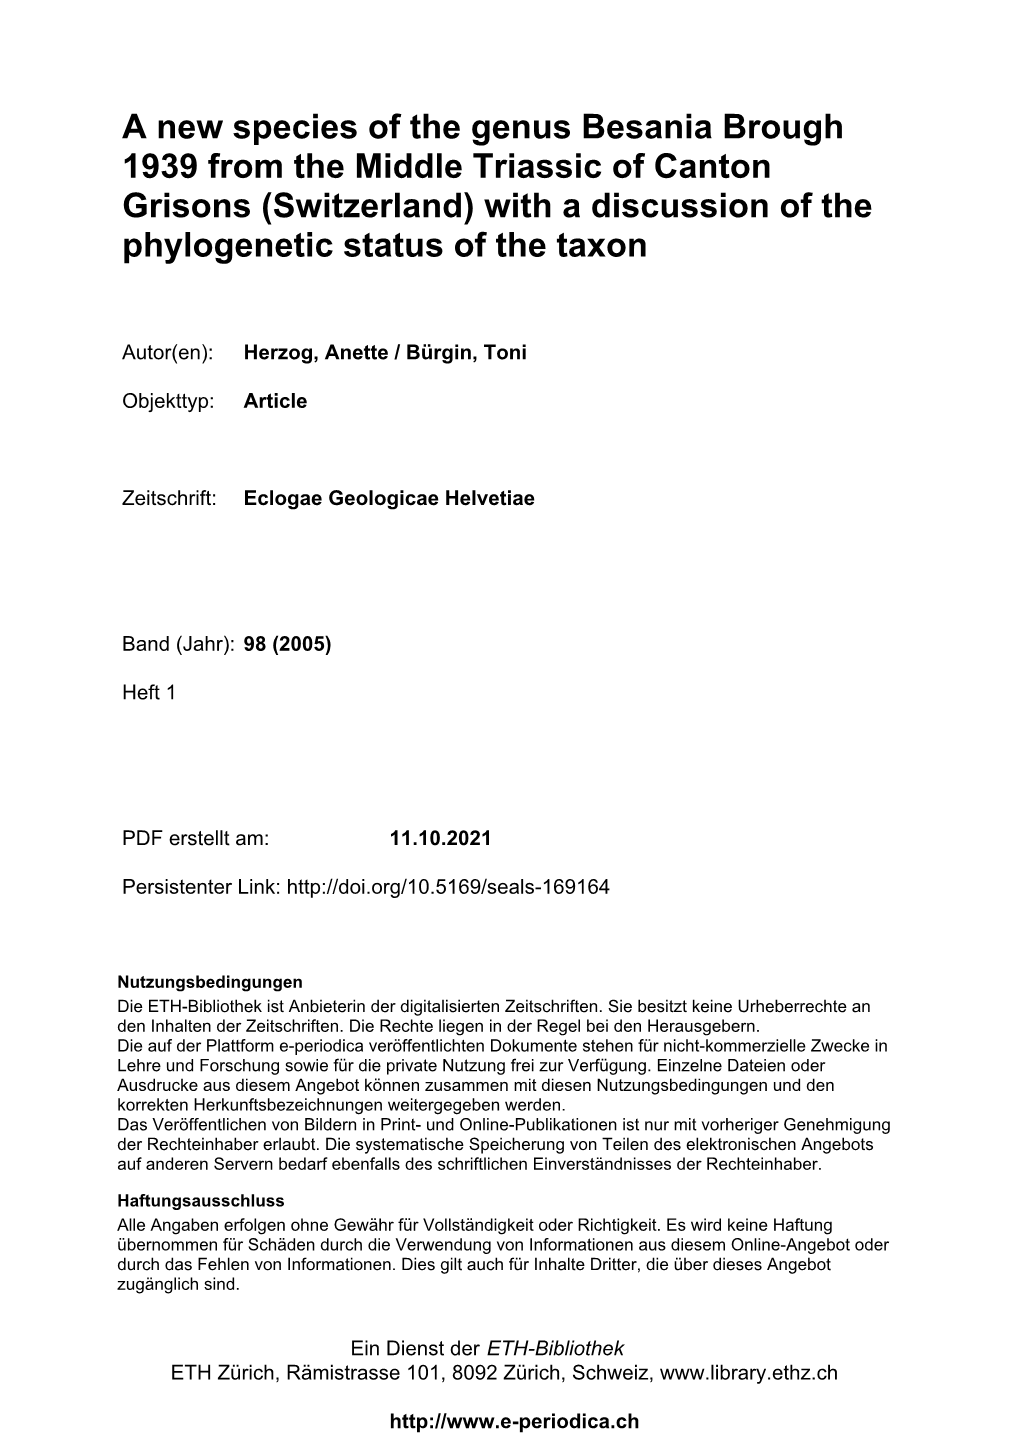 A New Species of the Genus Besania Brough 1939 from the Middle Triassic of Canton Grisons (Switzerland) with a Discussion of the Phylogenetic Status of the Taxon